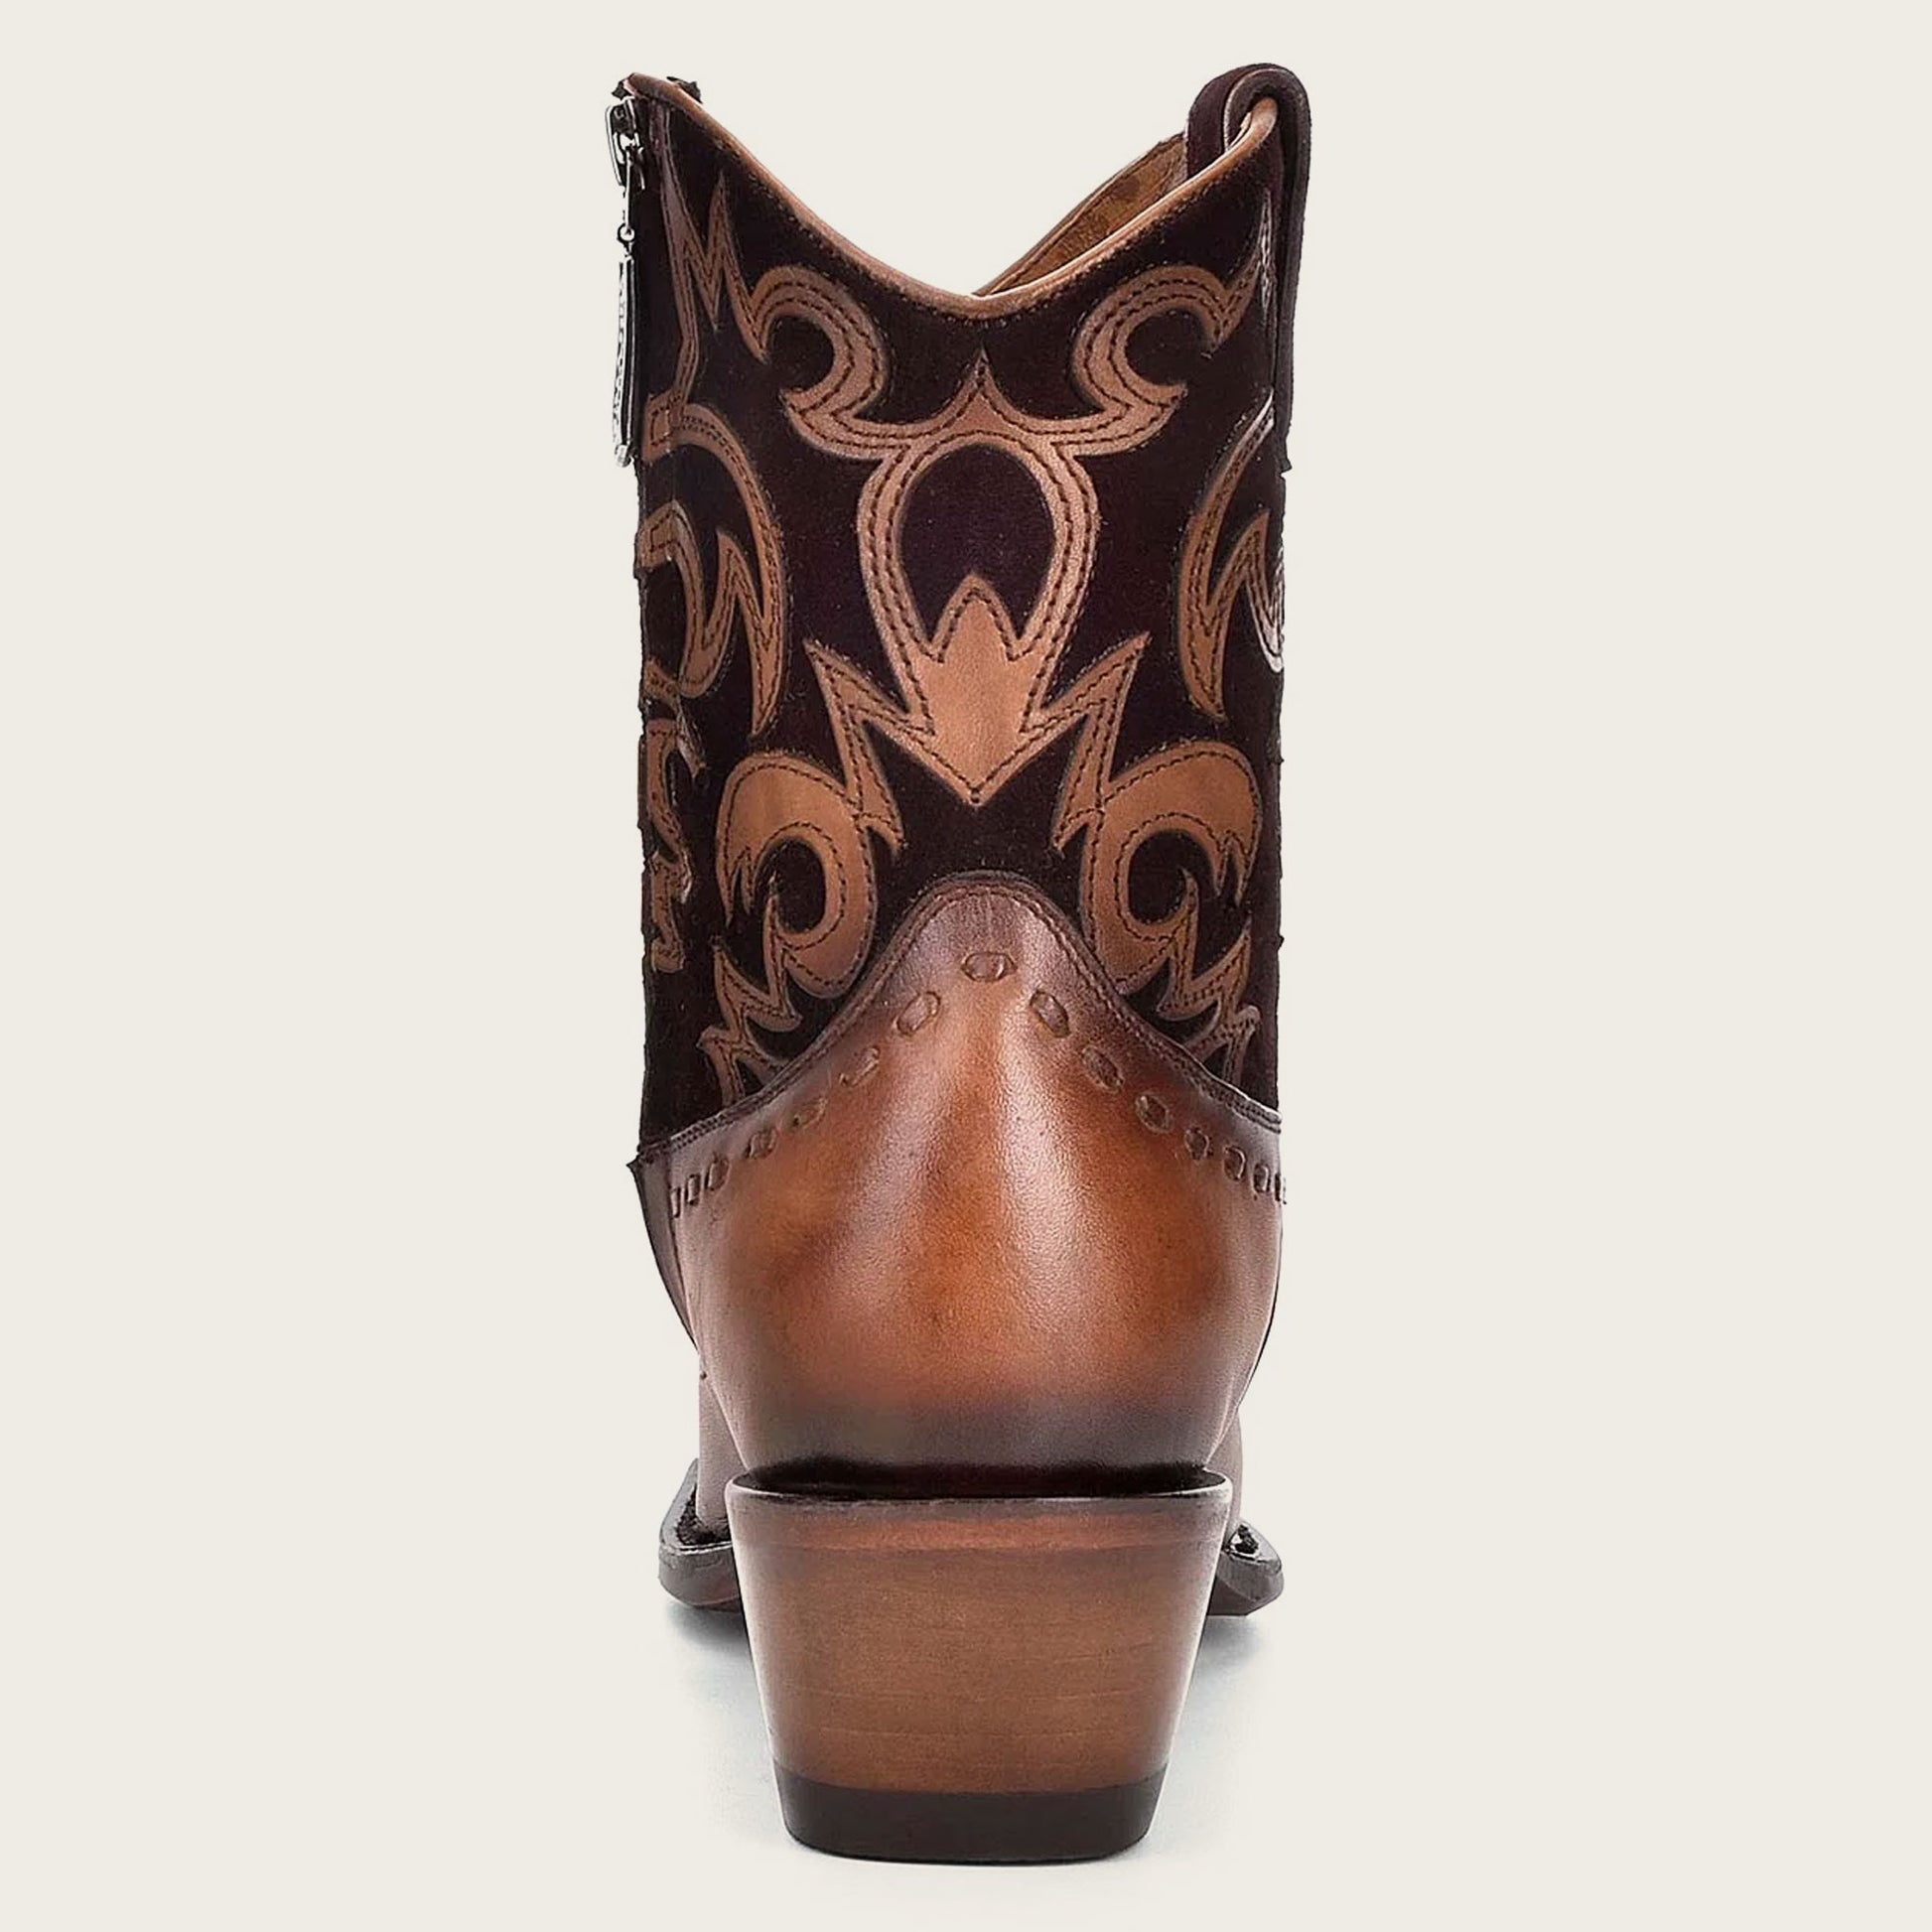 Brown Western leather bootie - high-quality leather with classic pointed toe and slanteIndulge in the bold and beautiful aesthetic of our Western Chic booties, and let them be the centerpiece of your outfit.